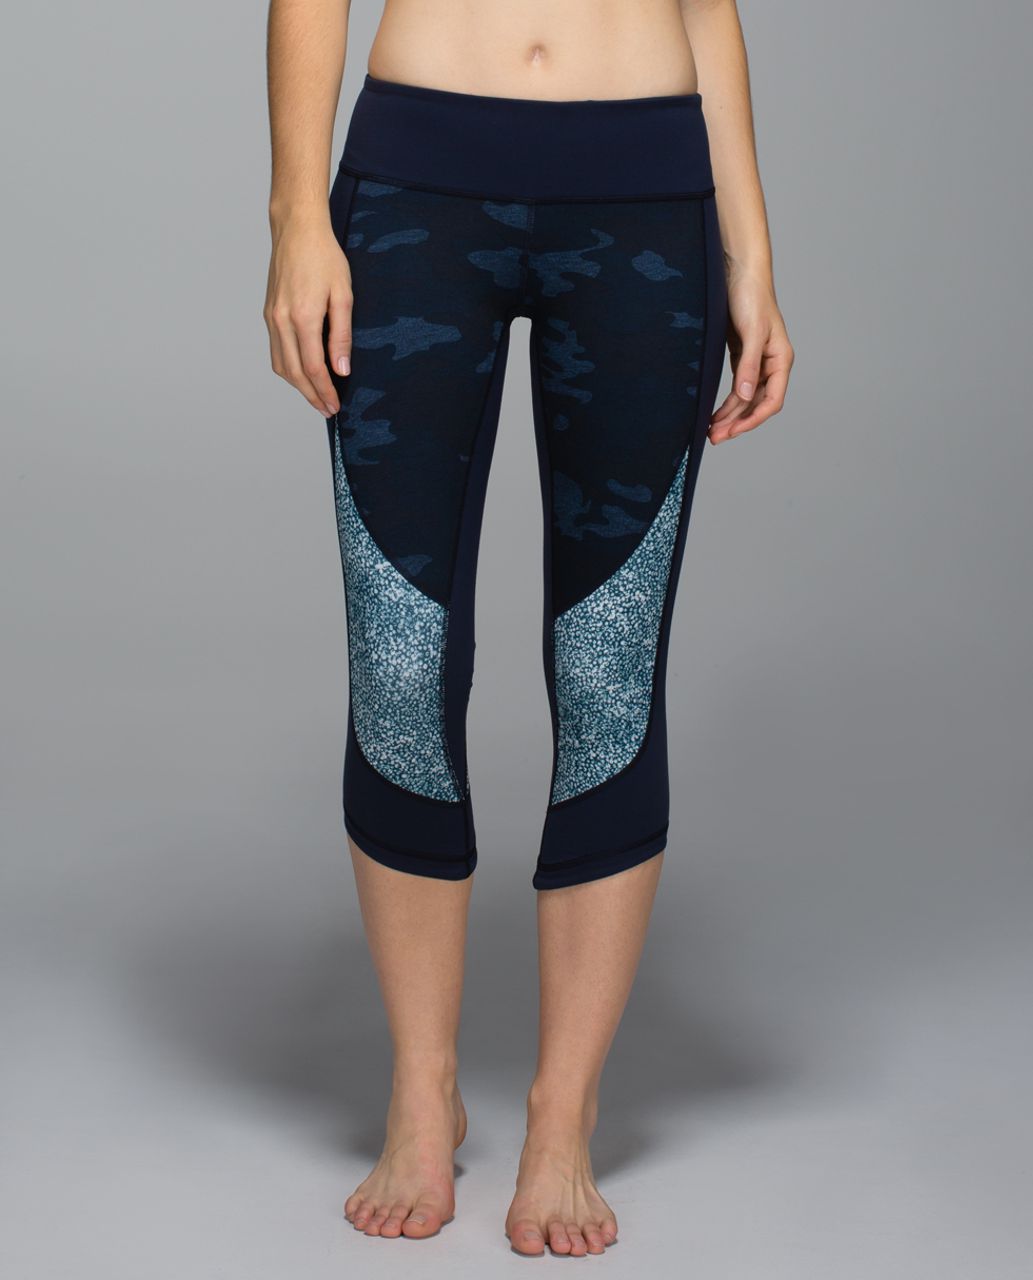 My Superficial Endeavors: Lululemon Inspire Crop in Heathered Textured  Lotus Camo Oil Slick Blue/Inkwell